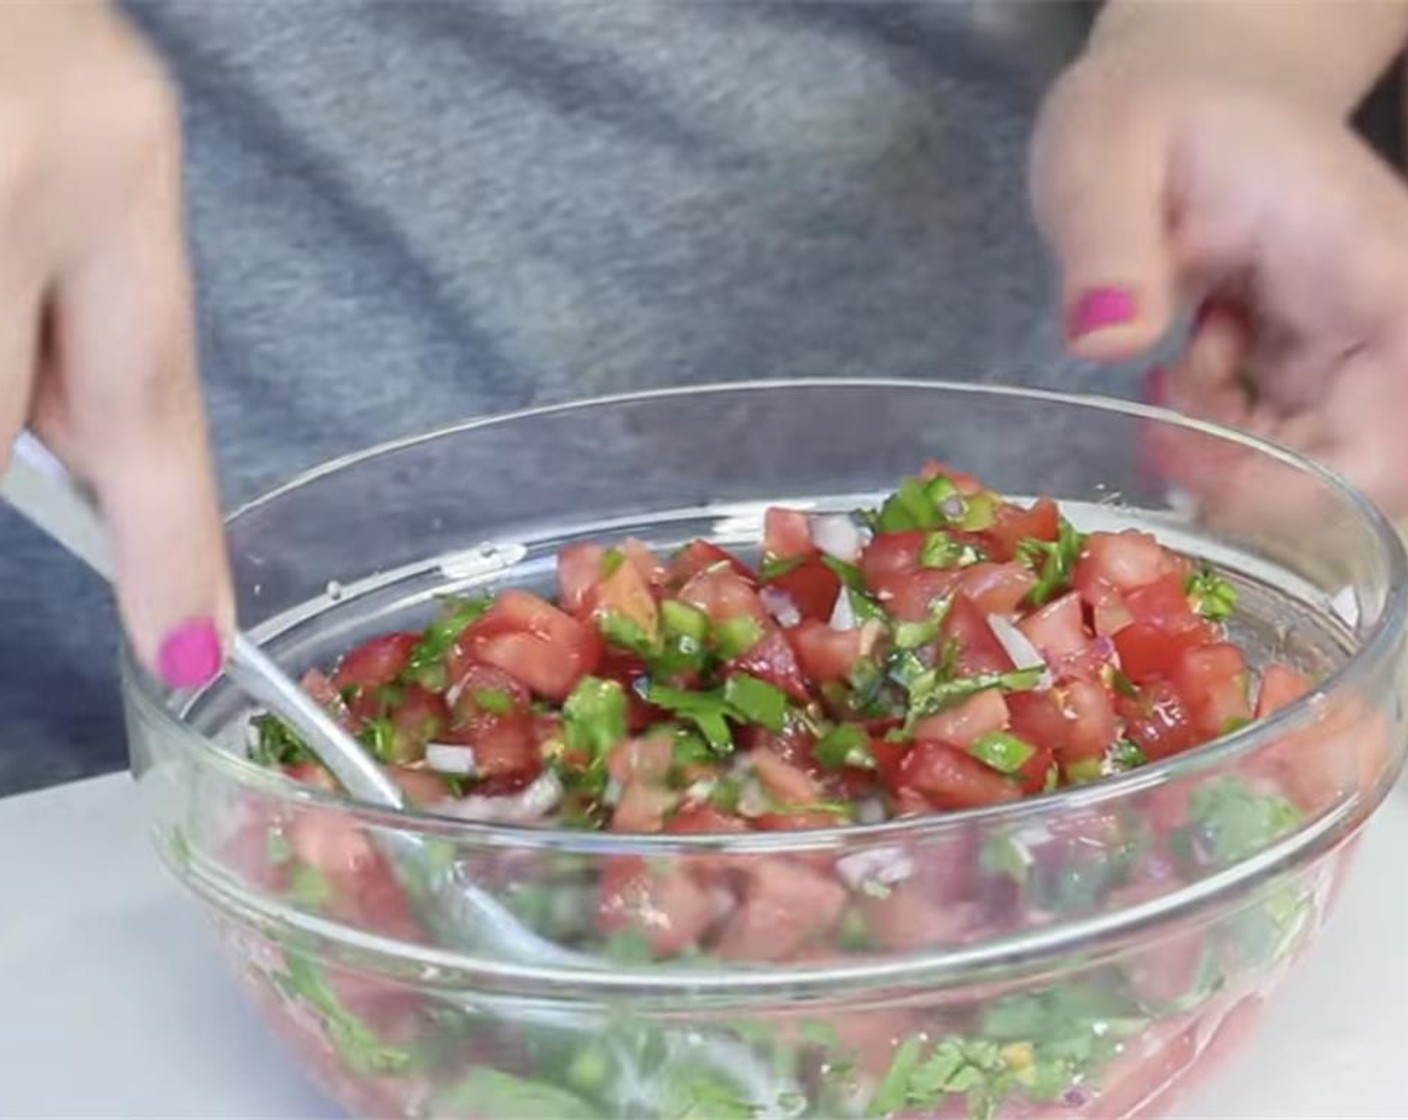 step 5 In a bowl, add the tomatoes, raw onion, chopped cilantro, garlic, Apple Cider Vinegar (2 Tbsp), 2 Tbsp of juice from Limes (2), Olive Oil (1 Tbsp), Agave Syrup (1 tsp), Salt (to taste) and Ground Black Pepper (to taste). Toss and marinate in the fridge for 30 mins.